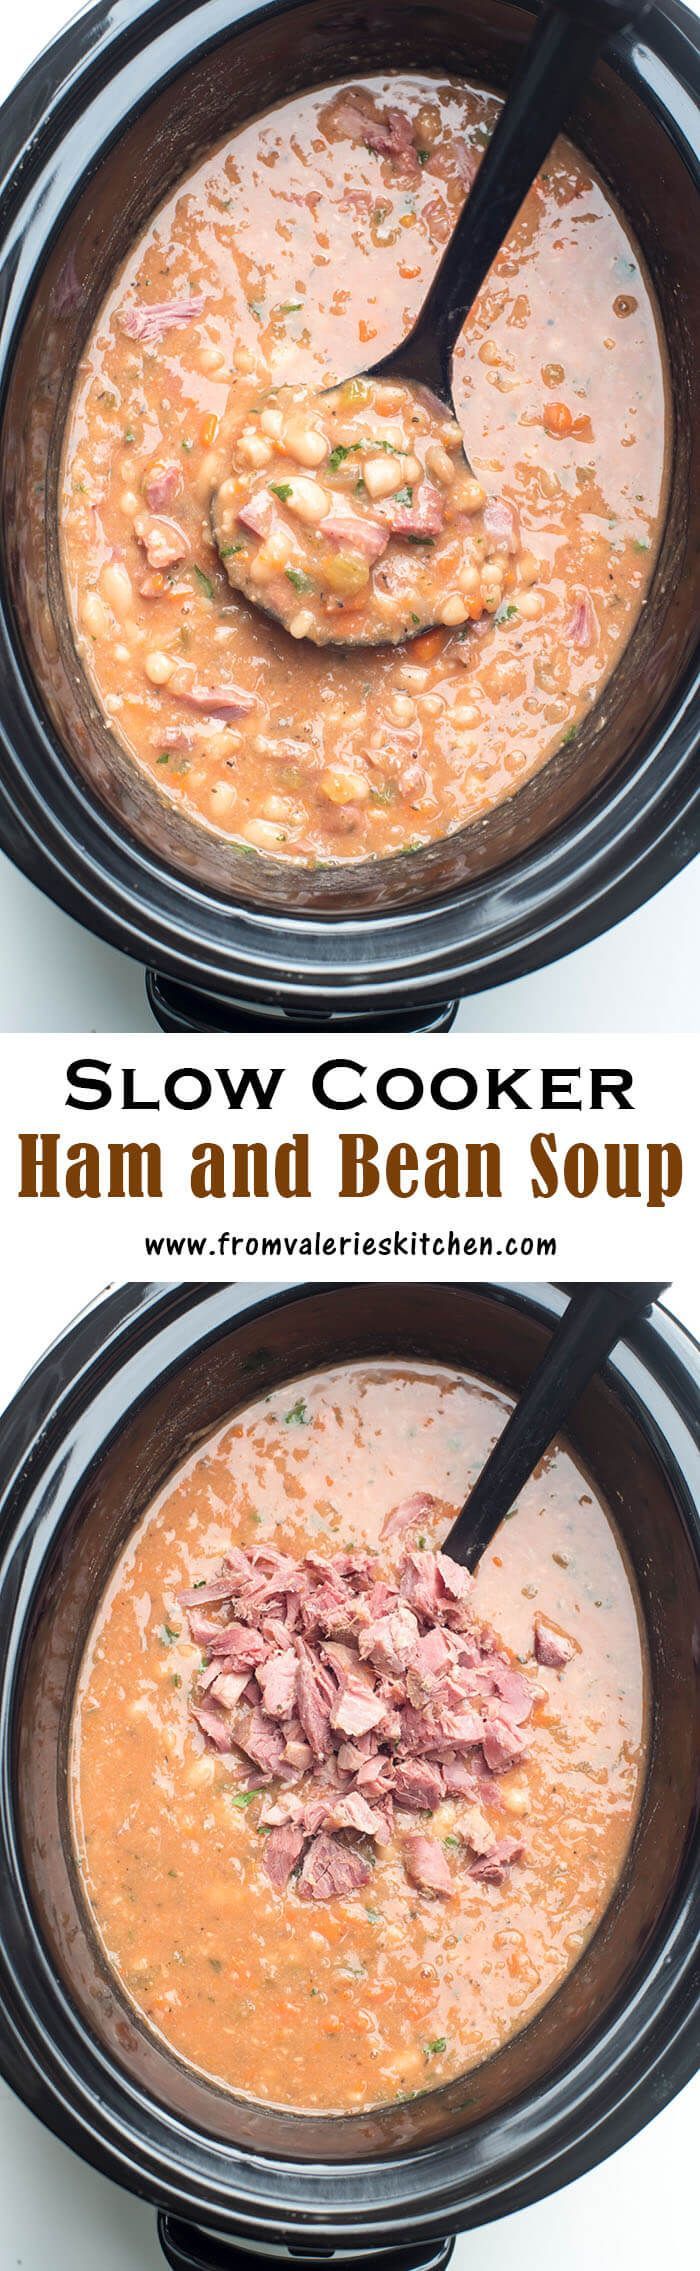 A great way to make use of the ham bone from your holiday ham. This Slow Cooker Ha